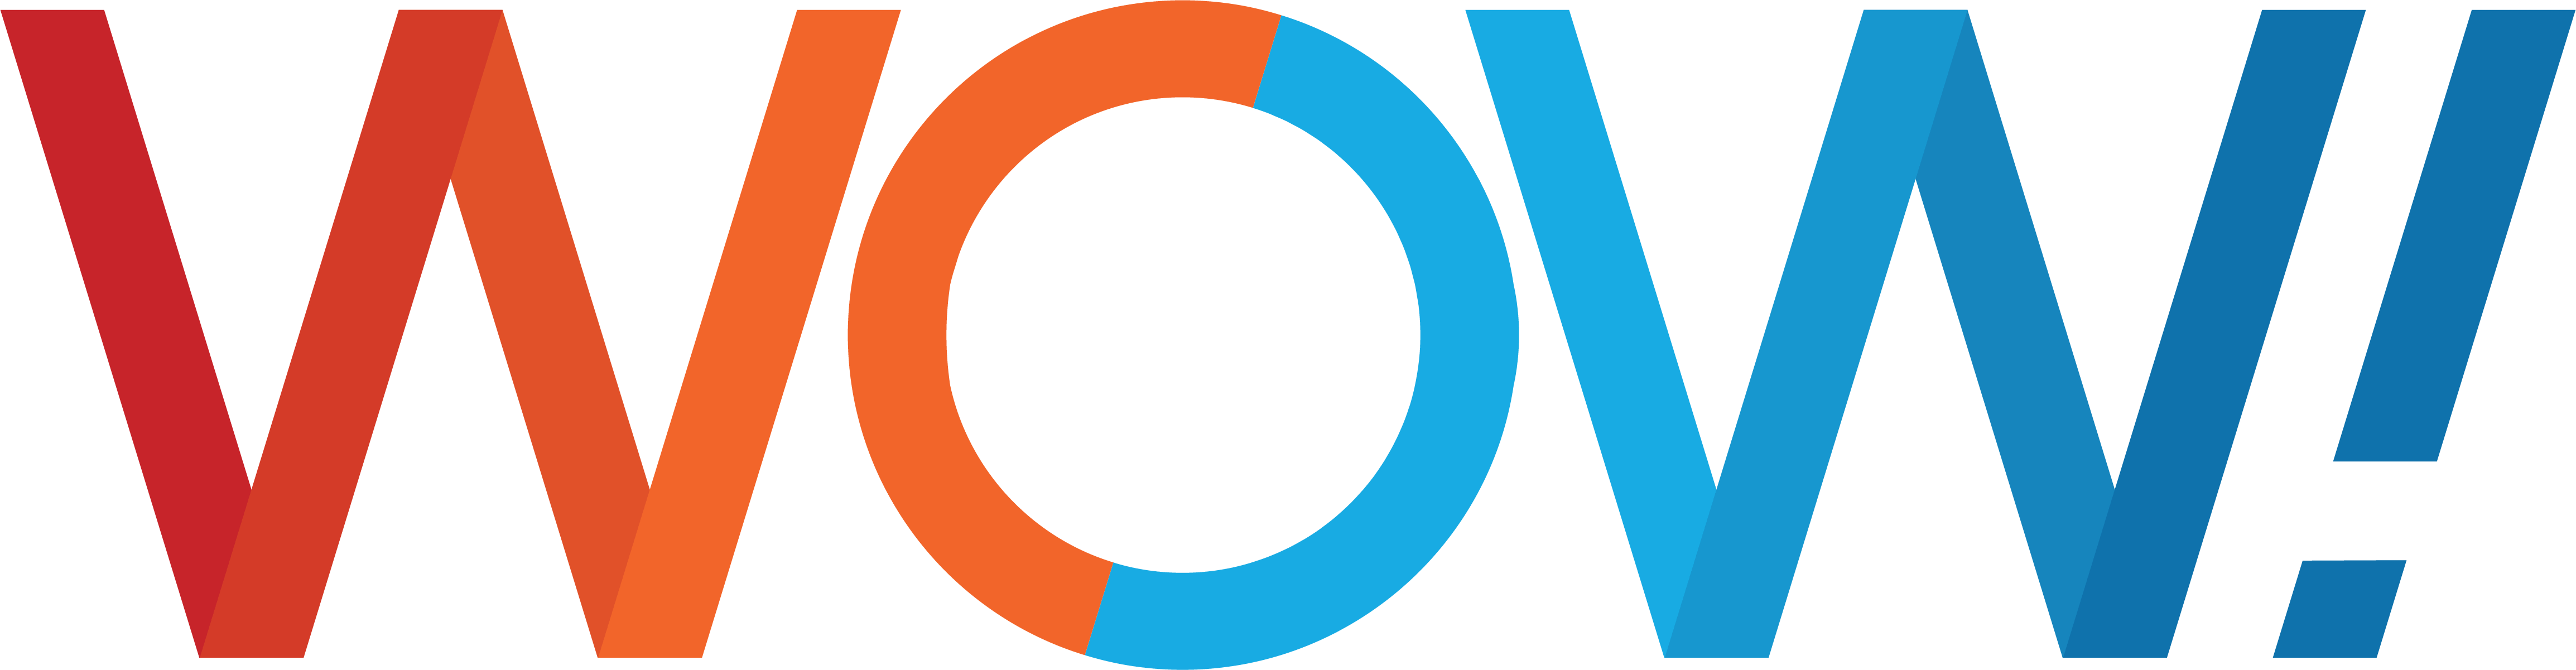 Wowway Logo - WOW! Internet Cable and Phone - Bundle offers and support